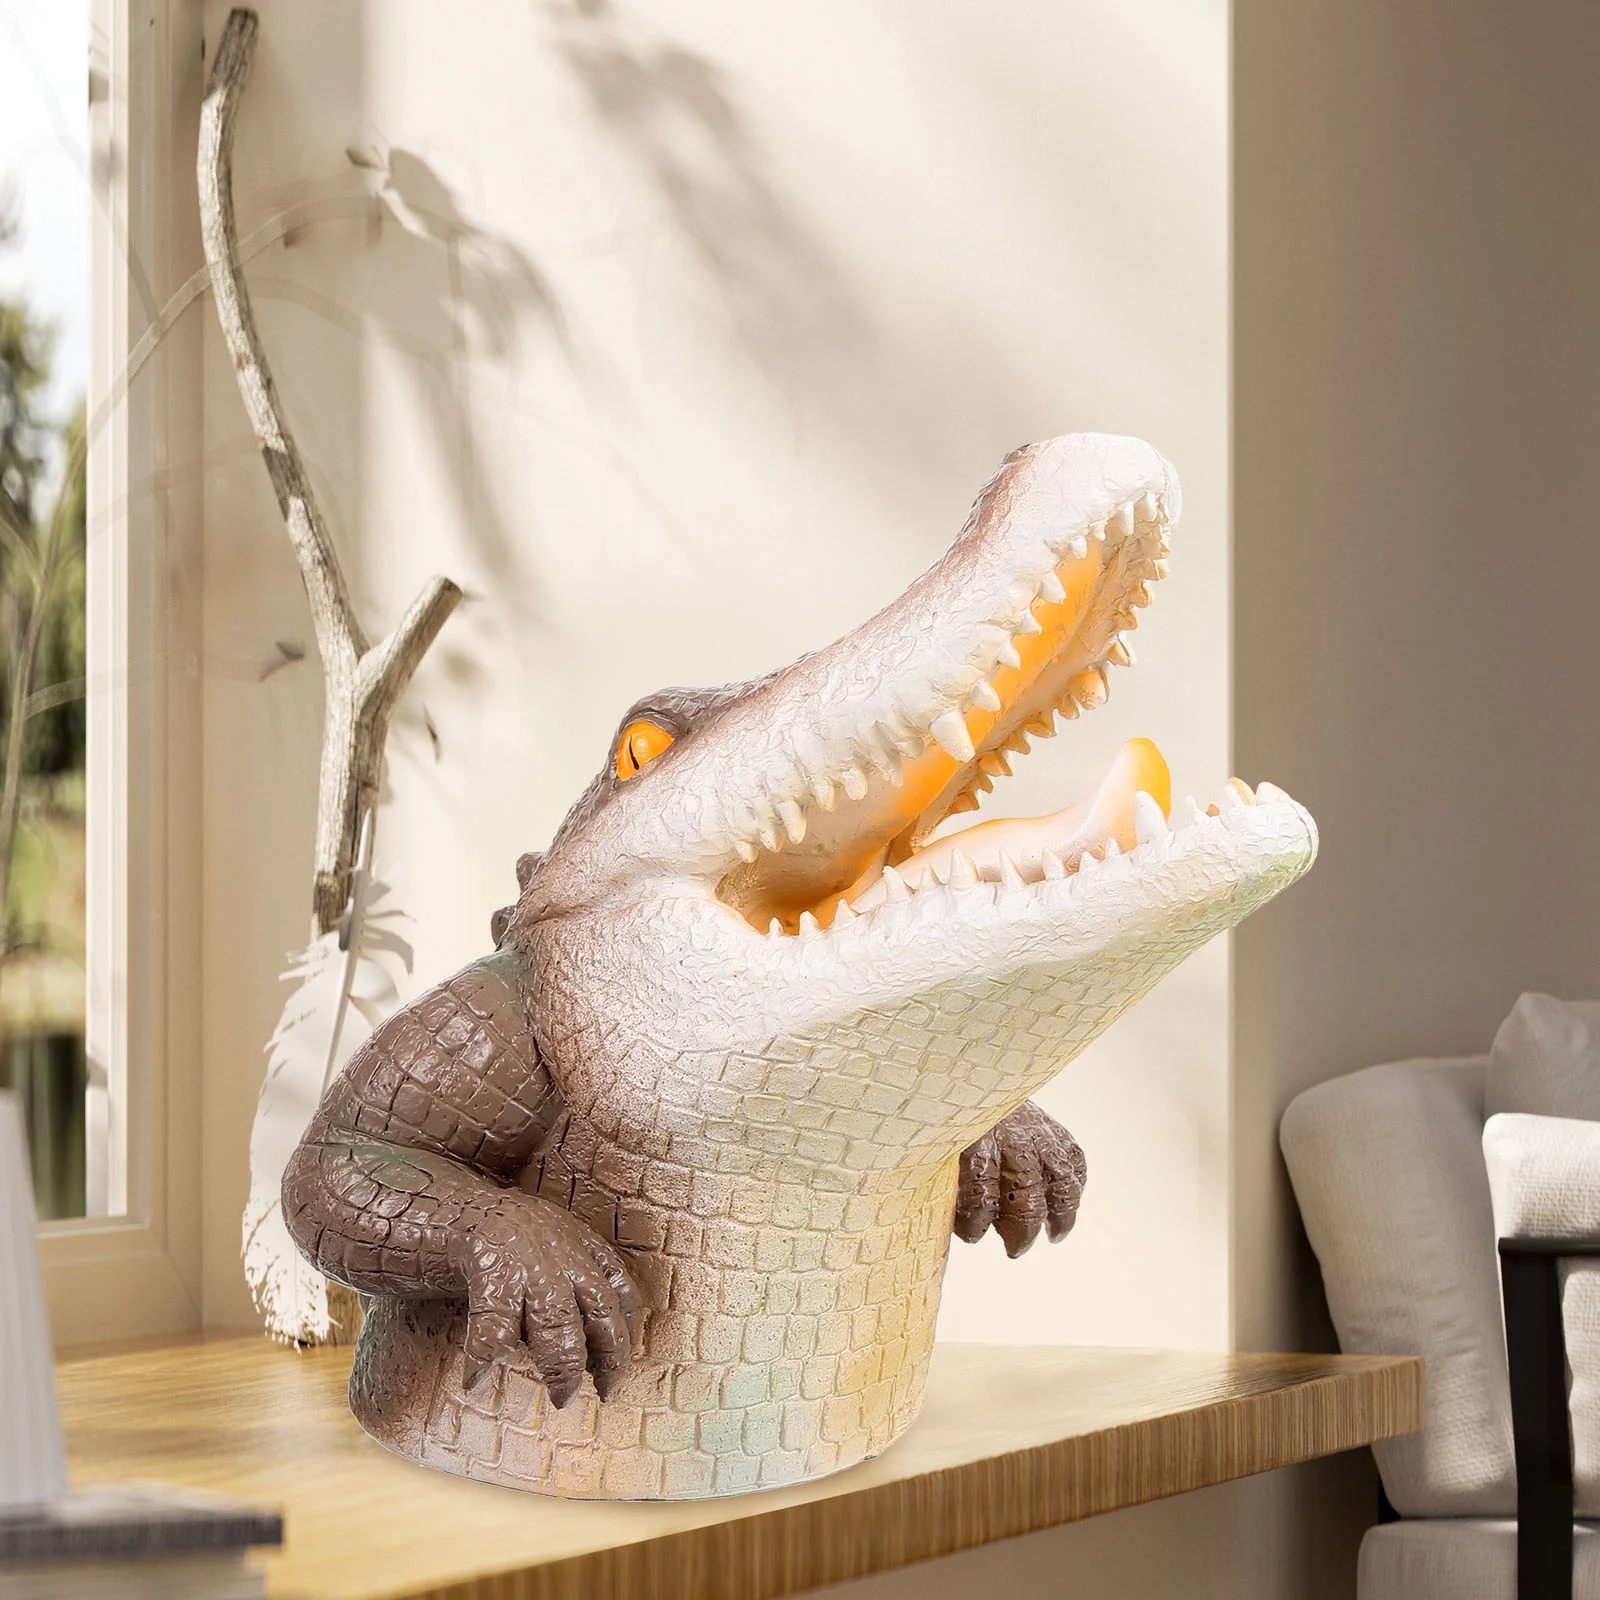 

Statue Simulated Crocodile Head Courtyard Pond Floating Animal Ornaments Outdoor Pool Decorations Child Models Resin